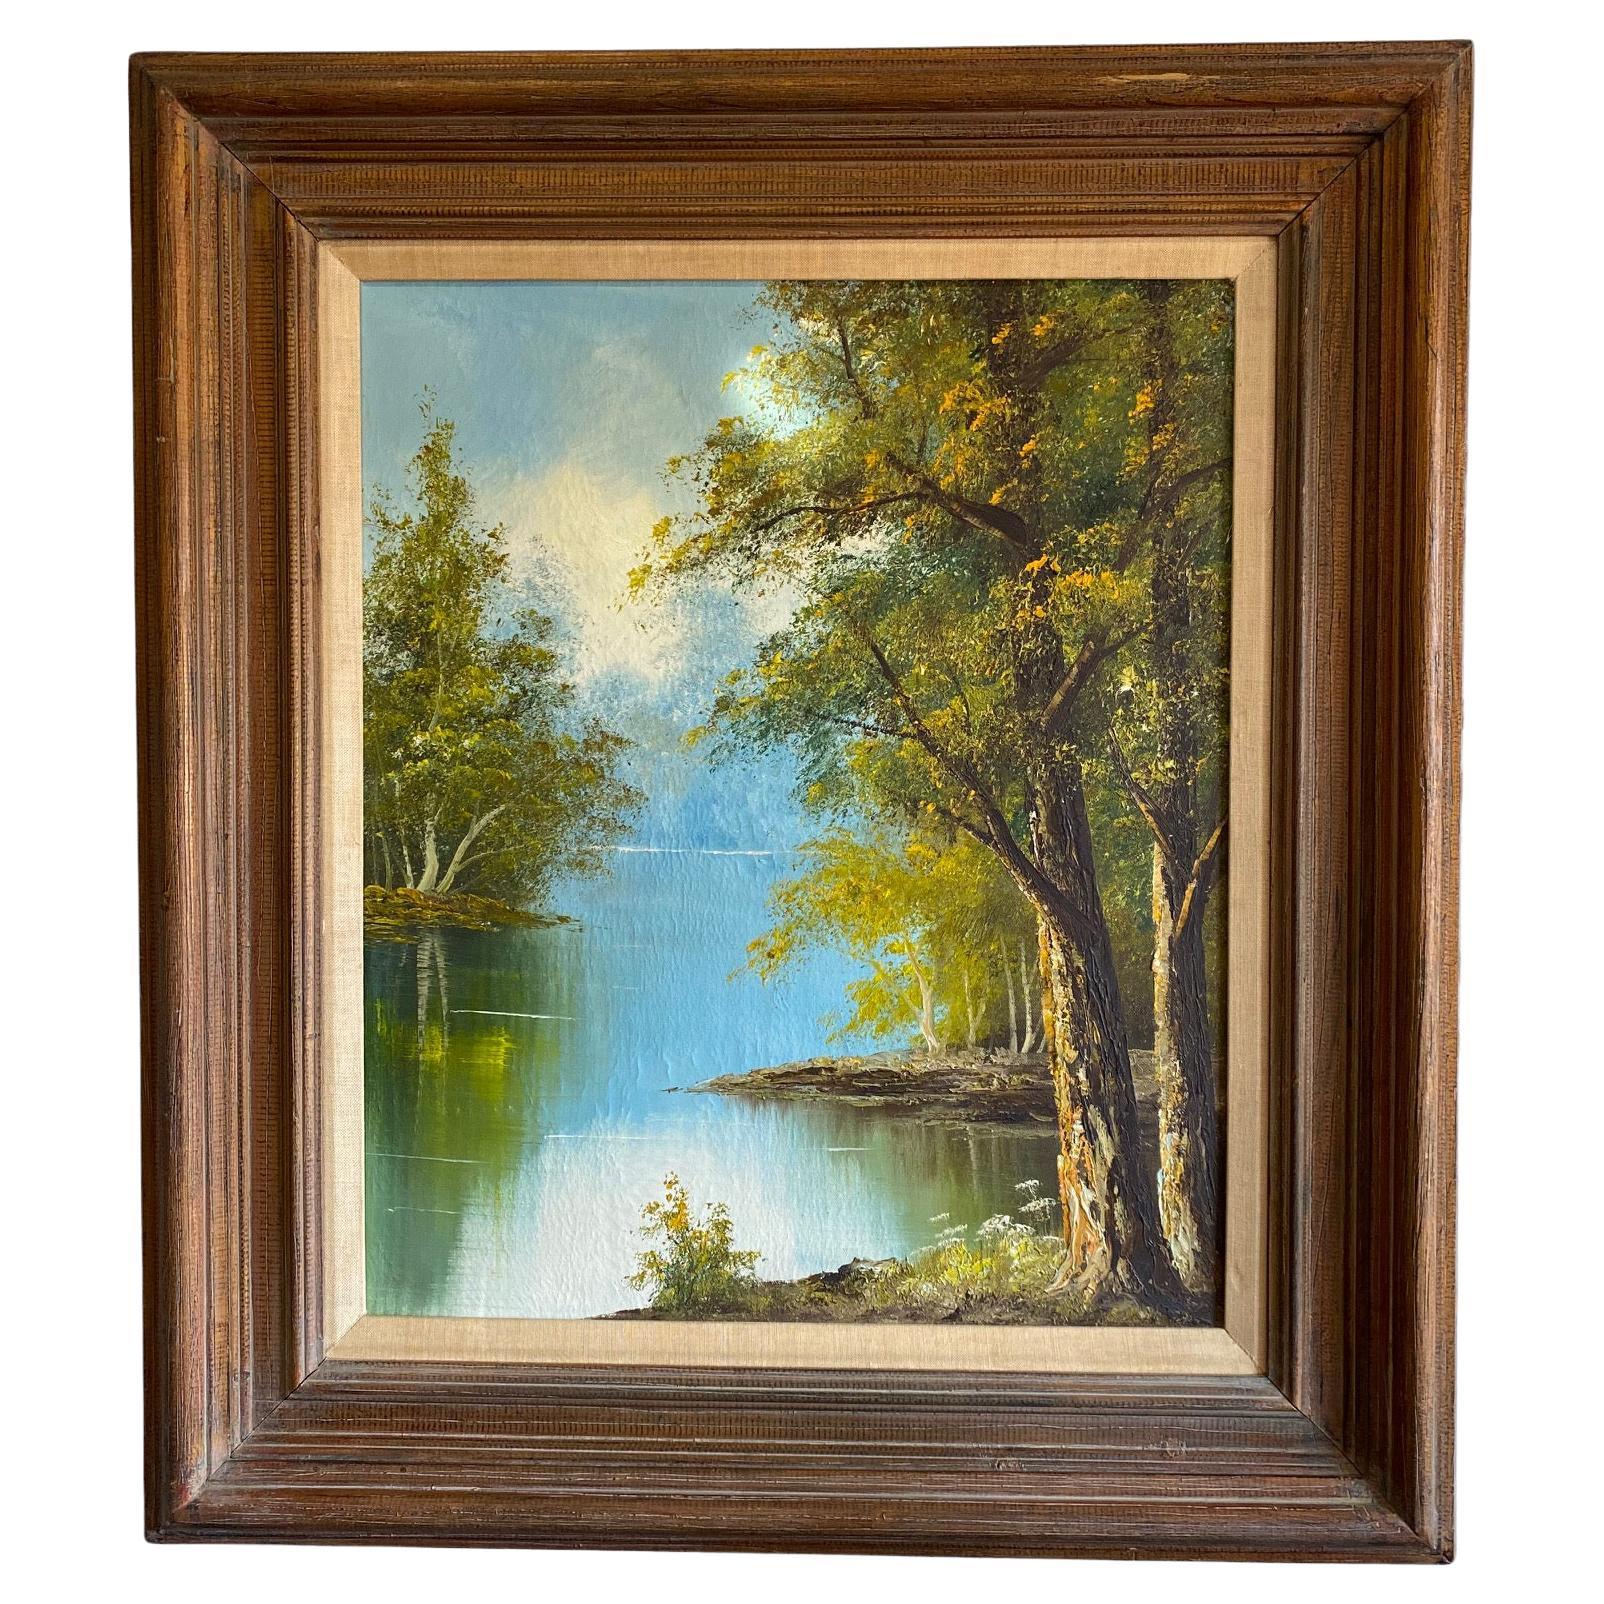 Water Scenery Nature Art Trees Vintage Landscape Oil Painting Original Oil Painting Nature Painting Gold Gilt Frame